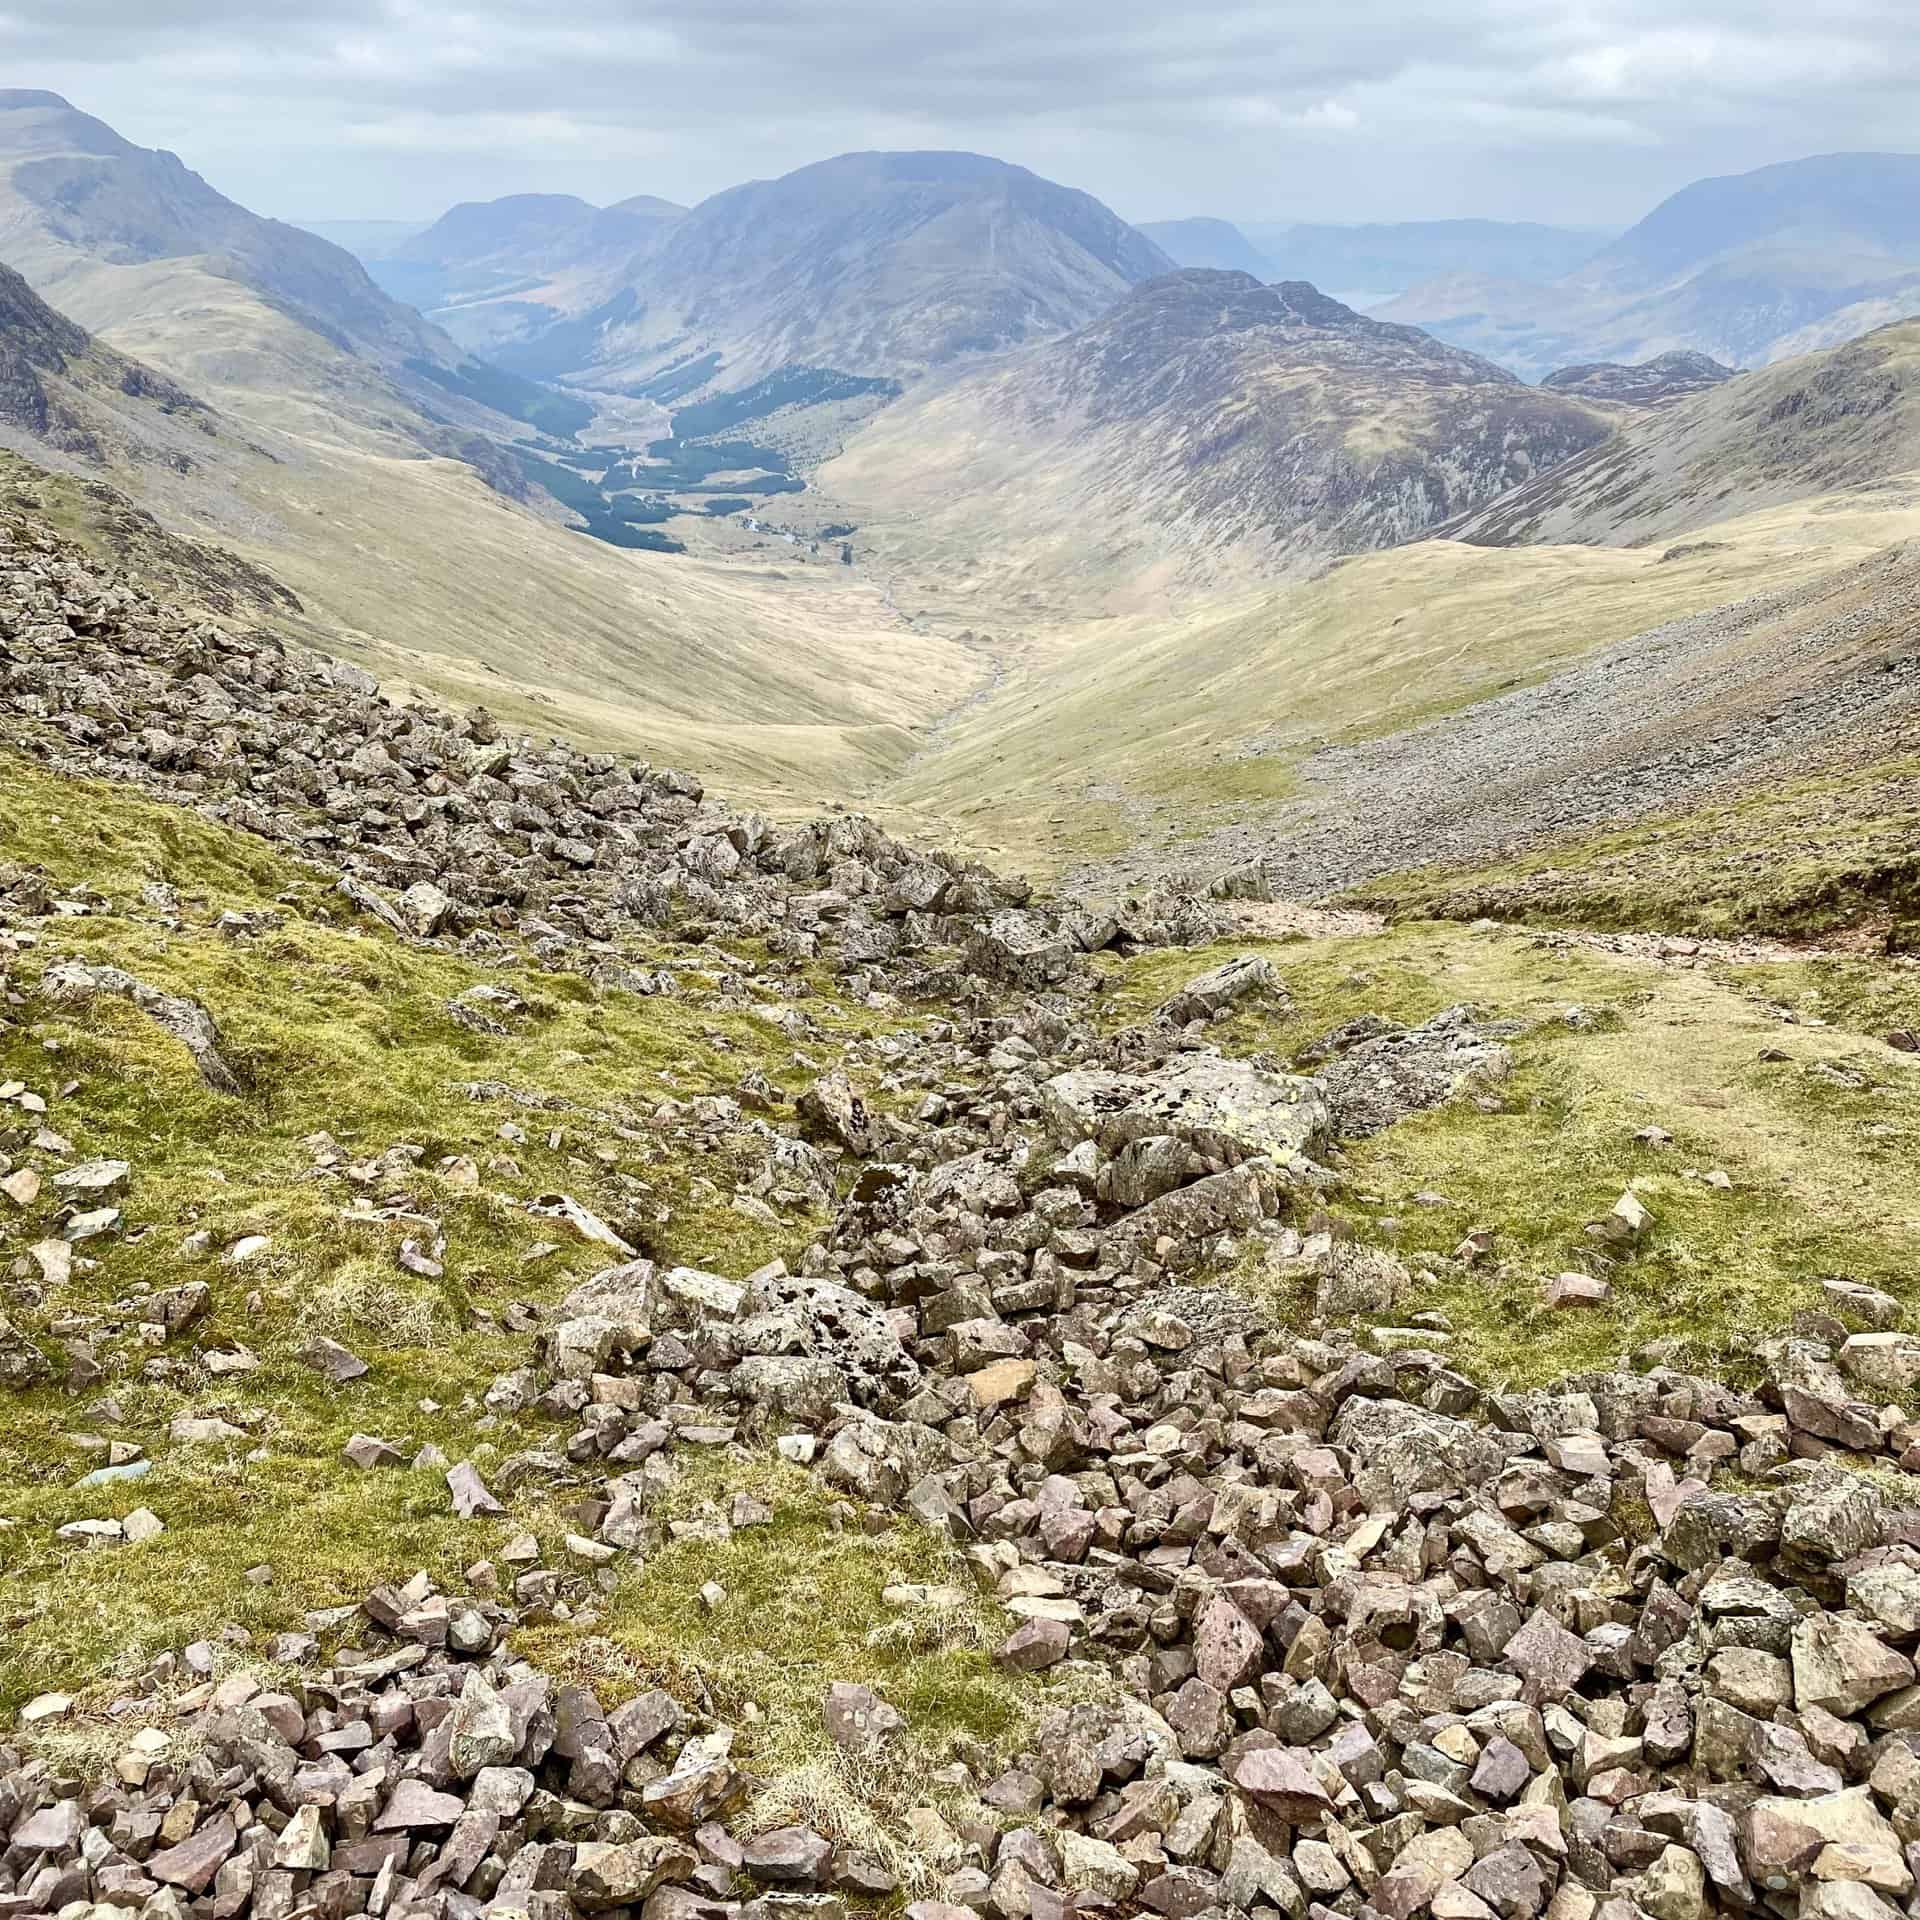 The mountain range which divides the Ennerdale valley and the Buttermere / Crummock Water valley includes, from front to back, Hay Stacks, High Crag, High Stile, Red Pike, Starling Dodd and Great Borne.